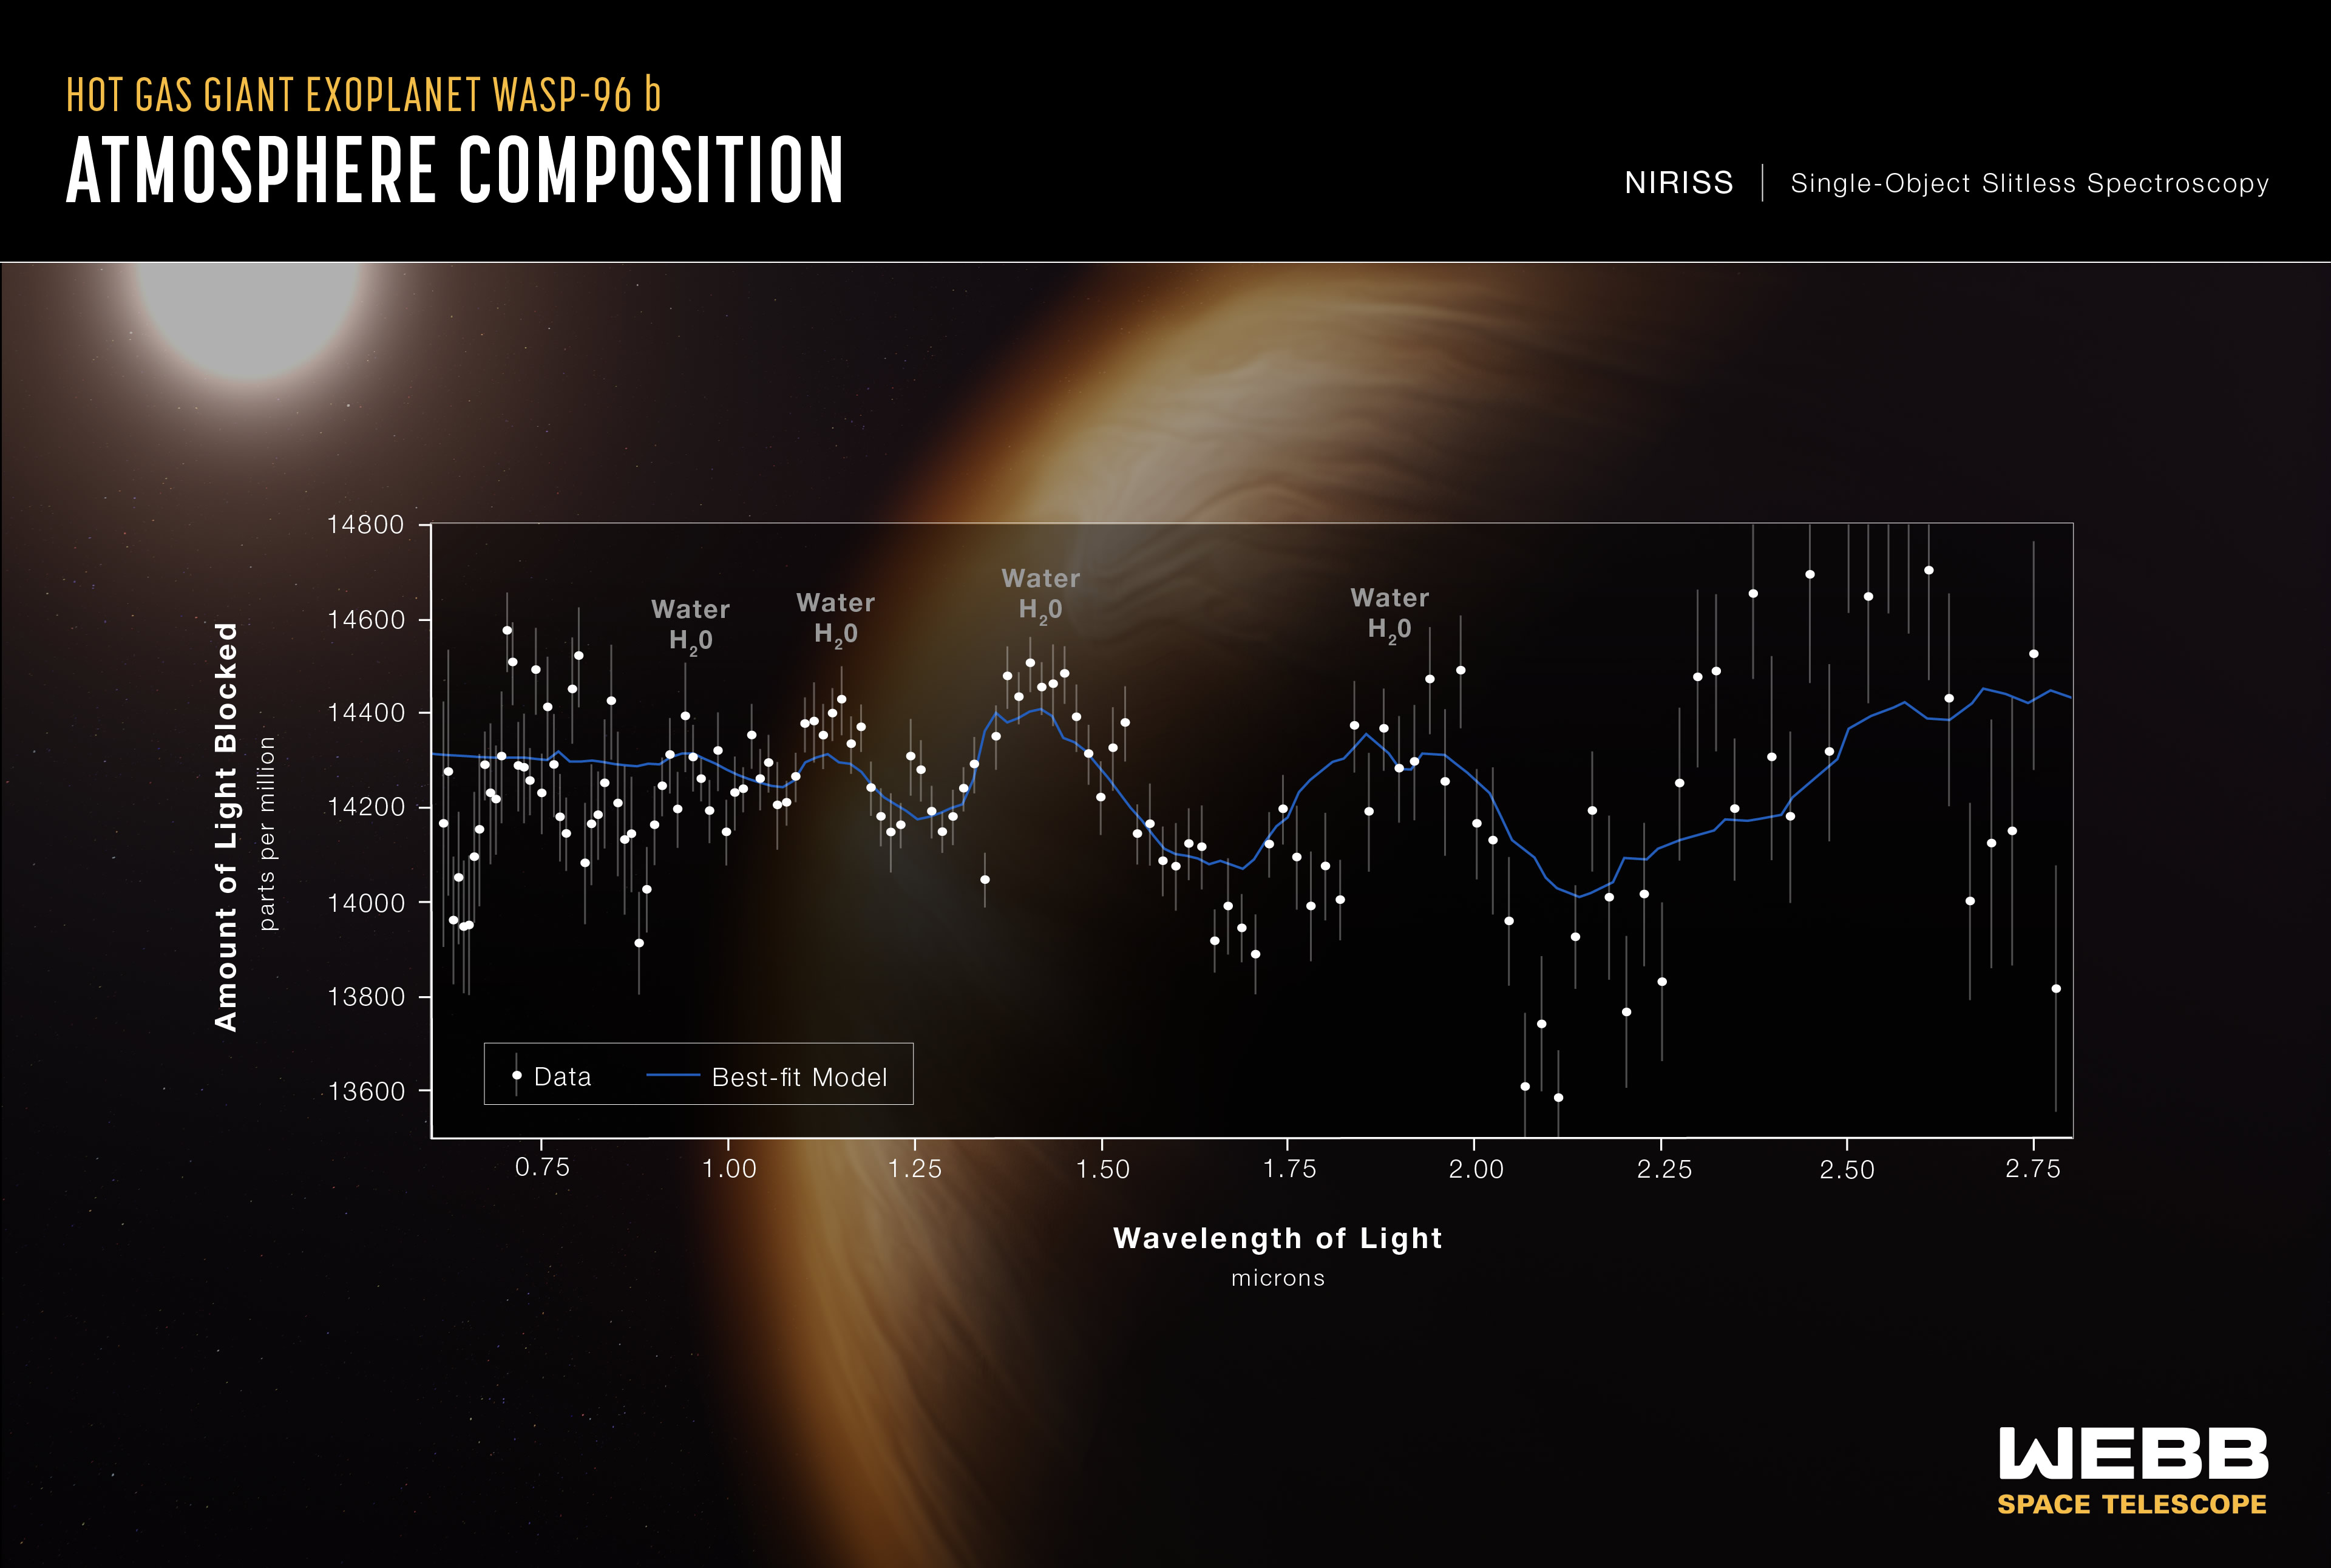 A chart showing an exoplanet’s spectroscopy measurements, taken from the James Webb Space Telescope 